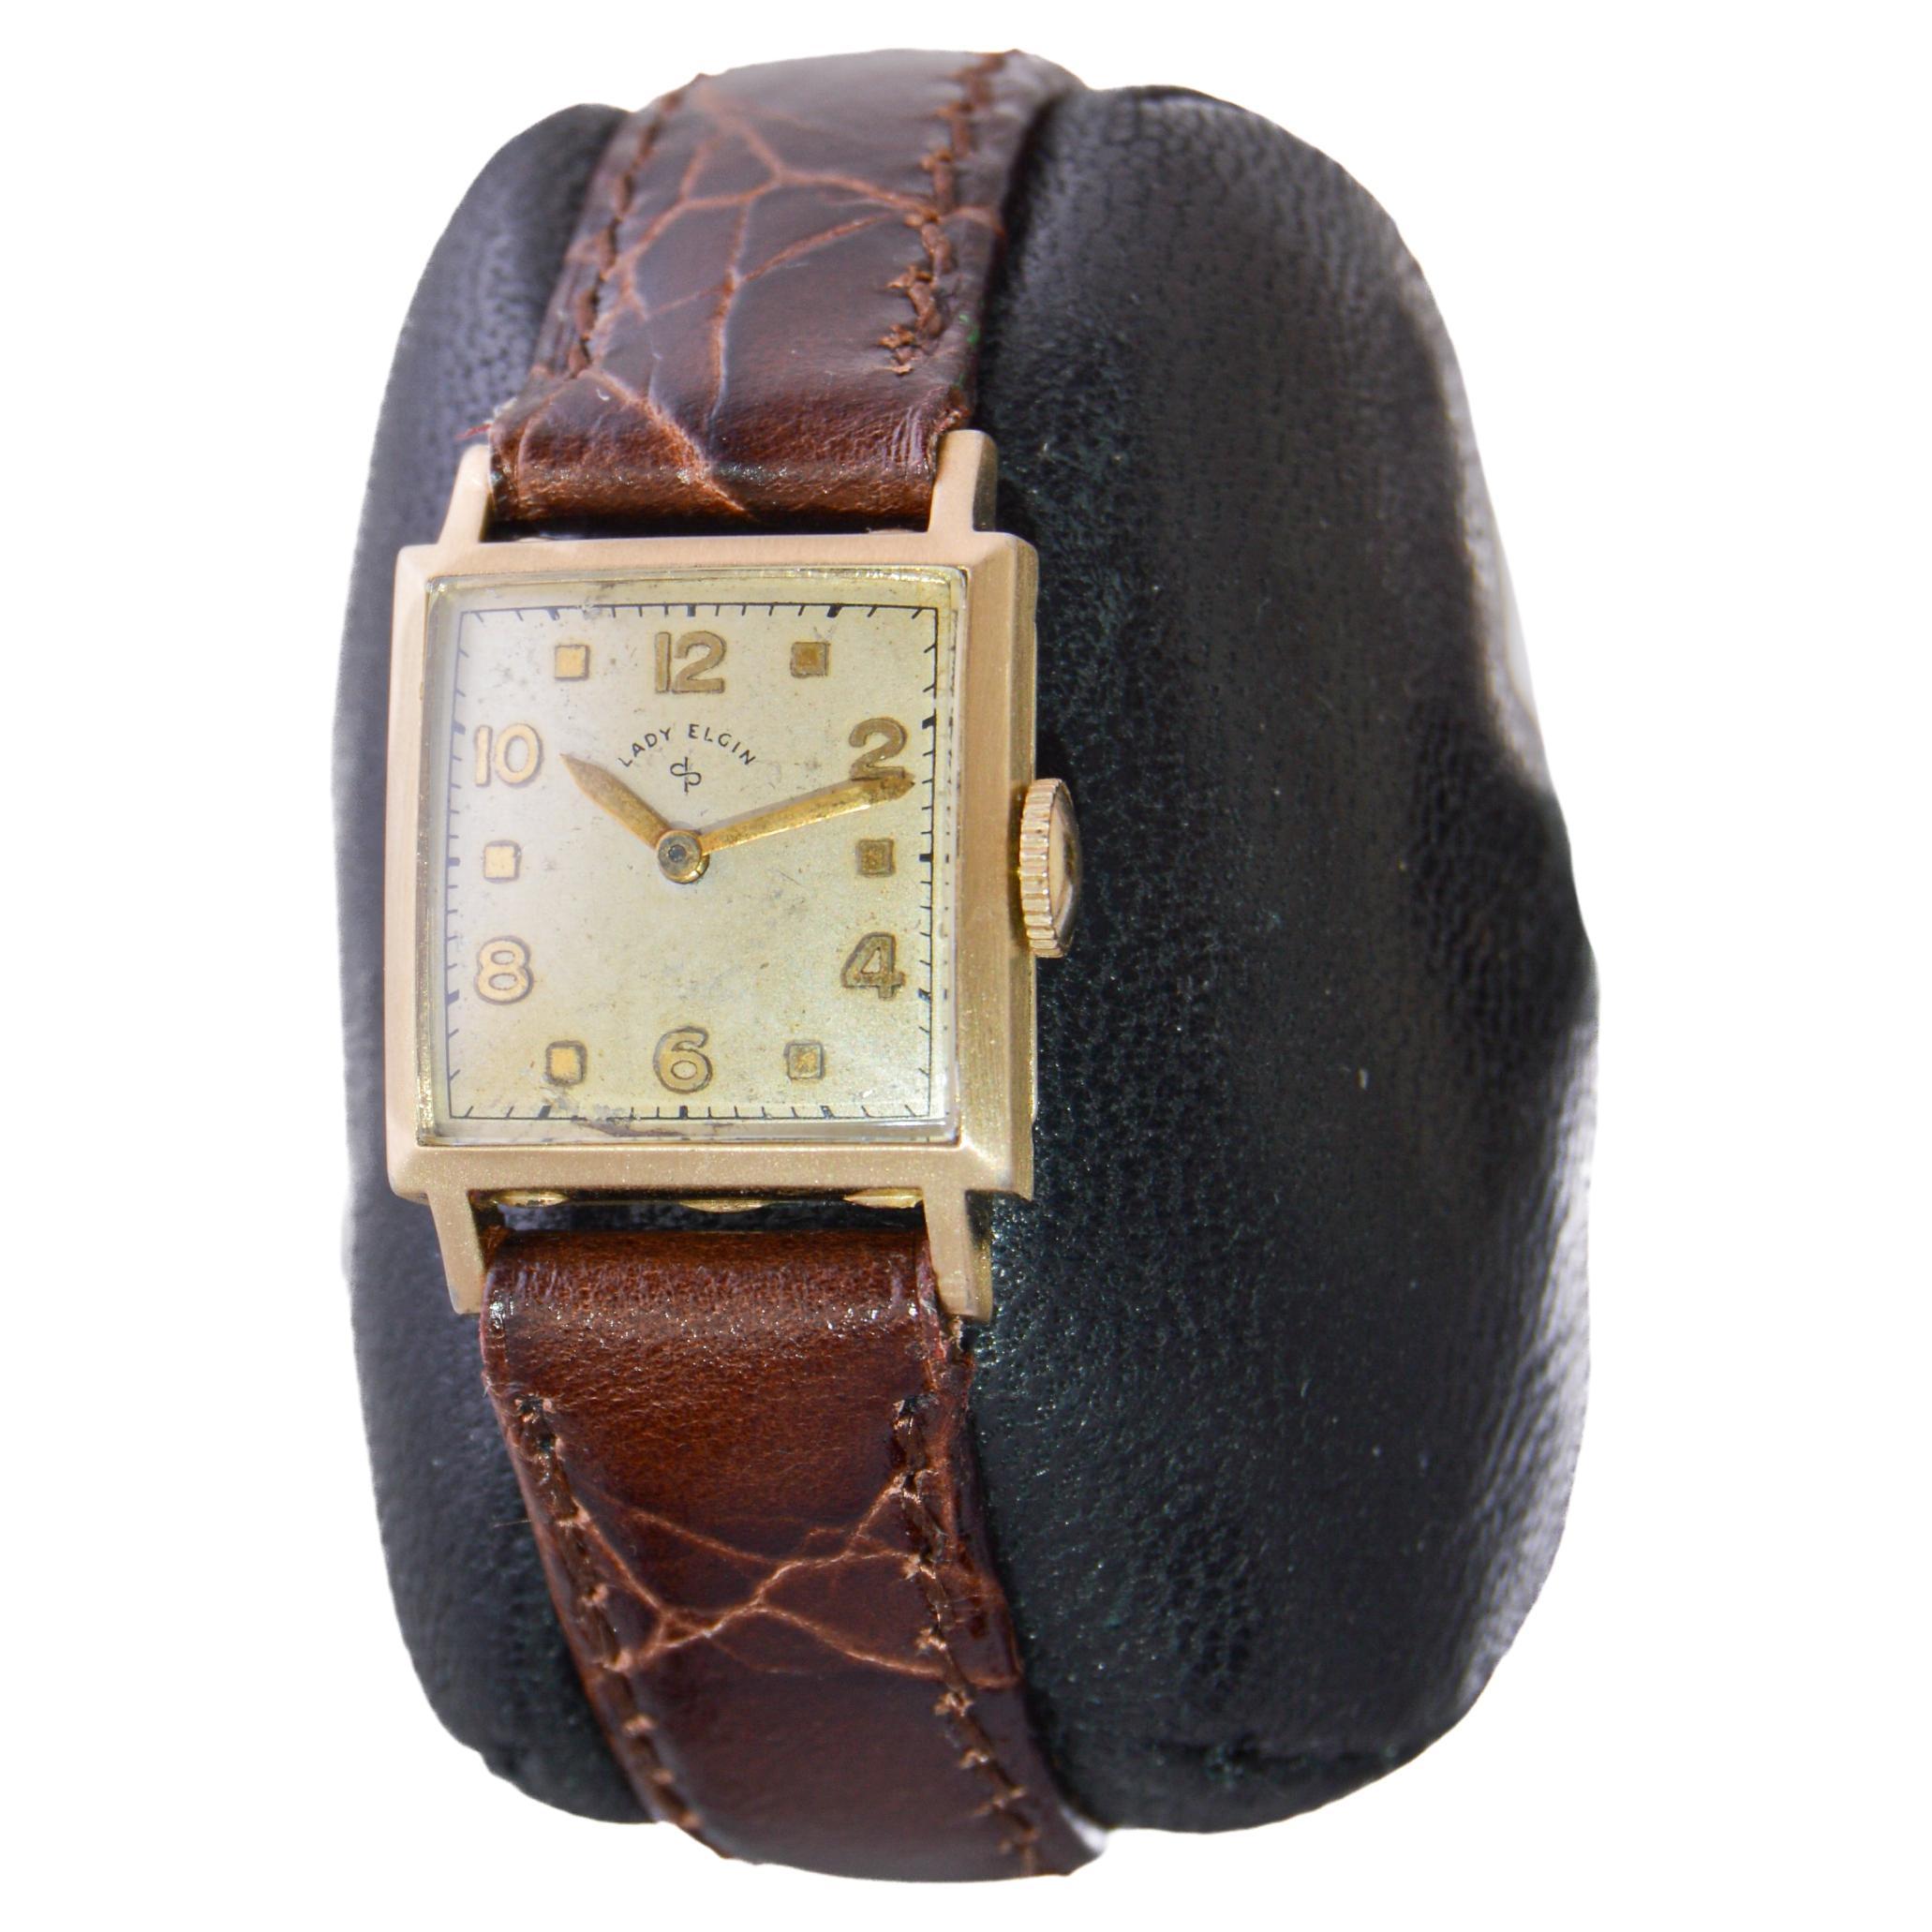 Lady Elgin Gold-Filled Art Deco Tank Watch with Original Dial from 1940's